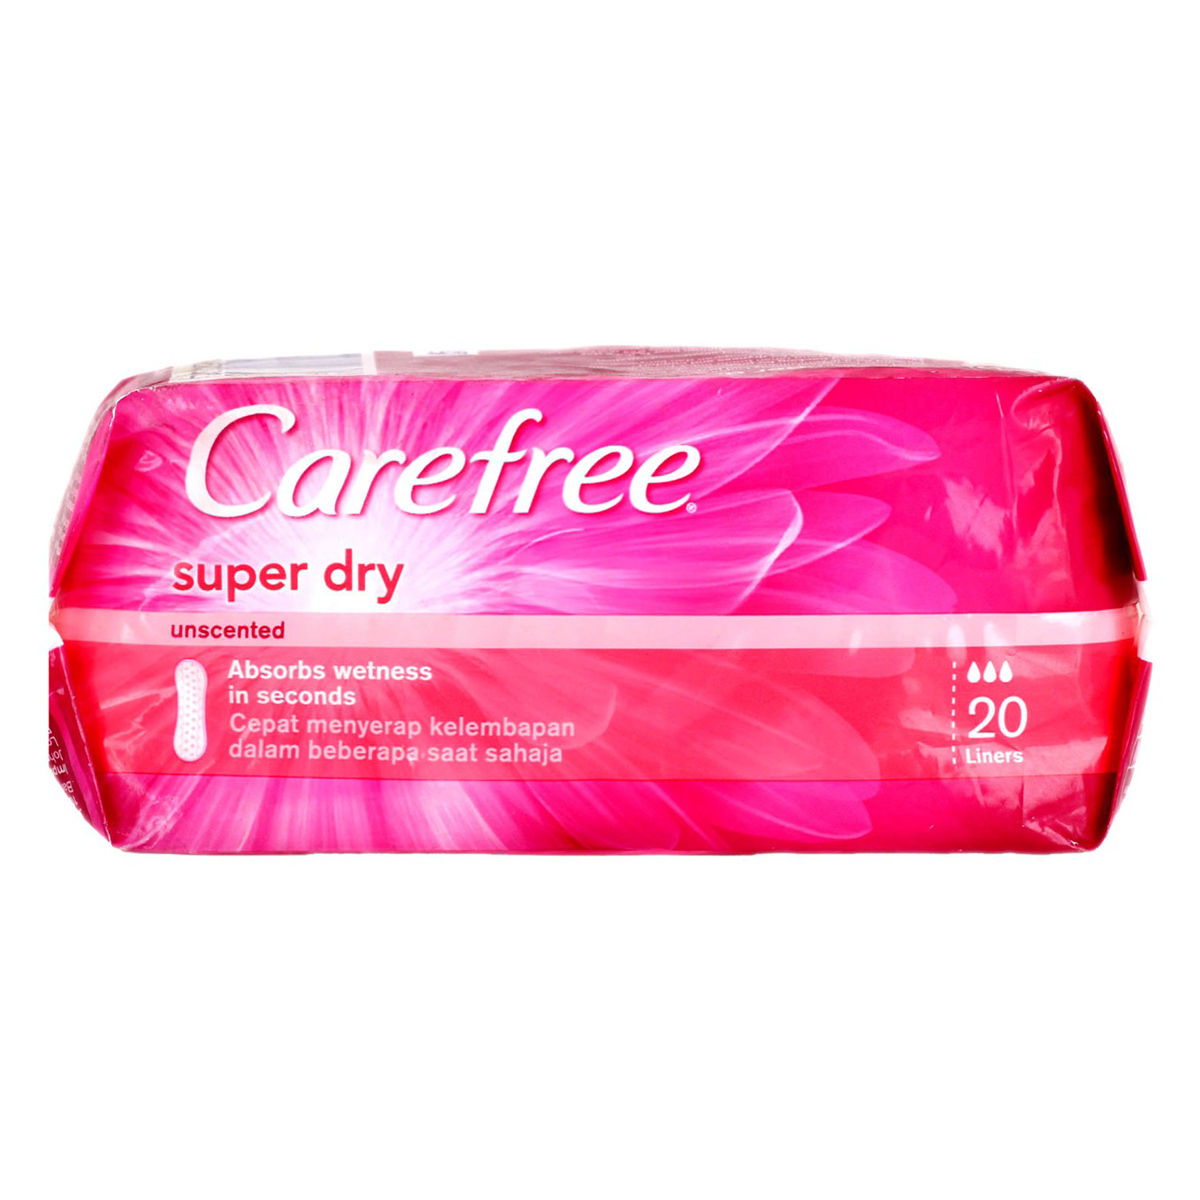 Buy Carefree Super Dry Extra-Absorbent Liners, 20 Count Online